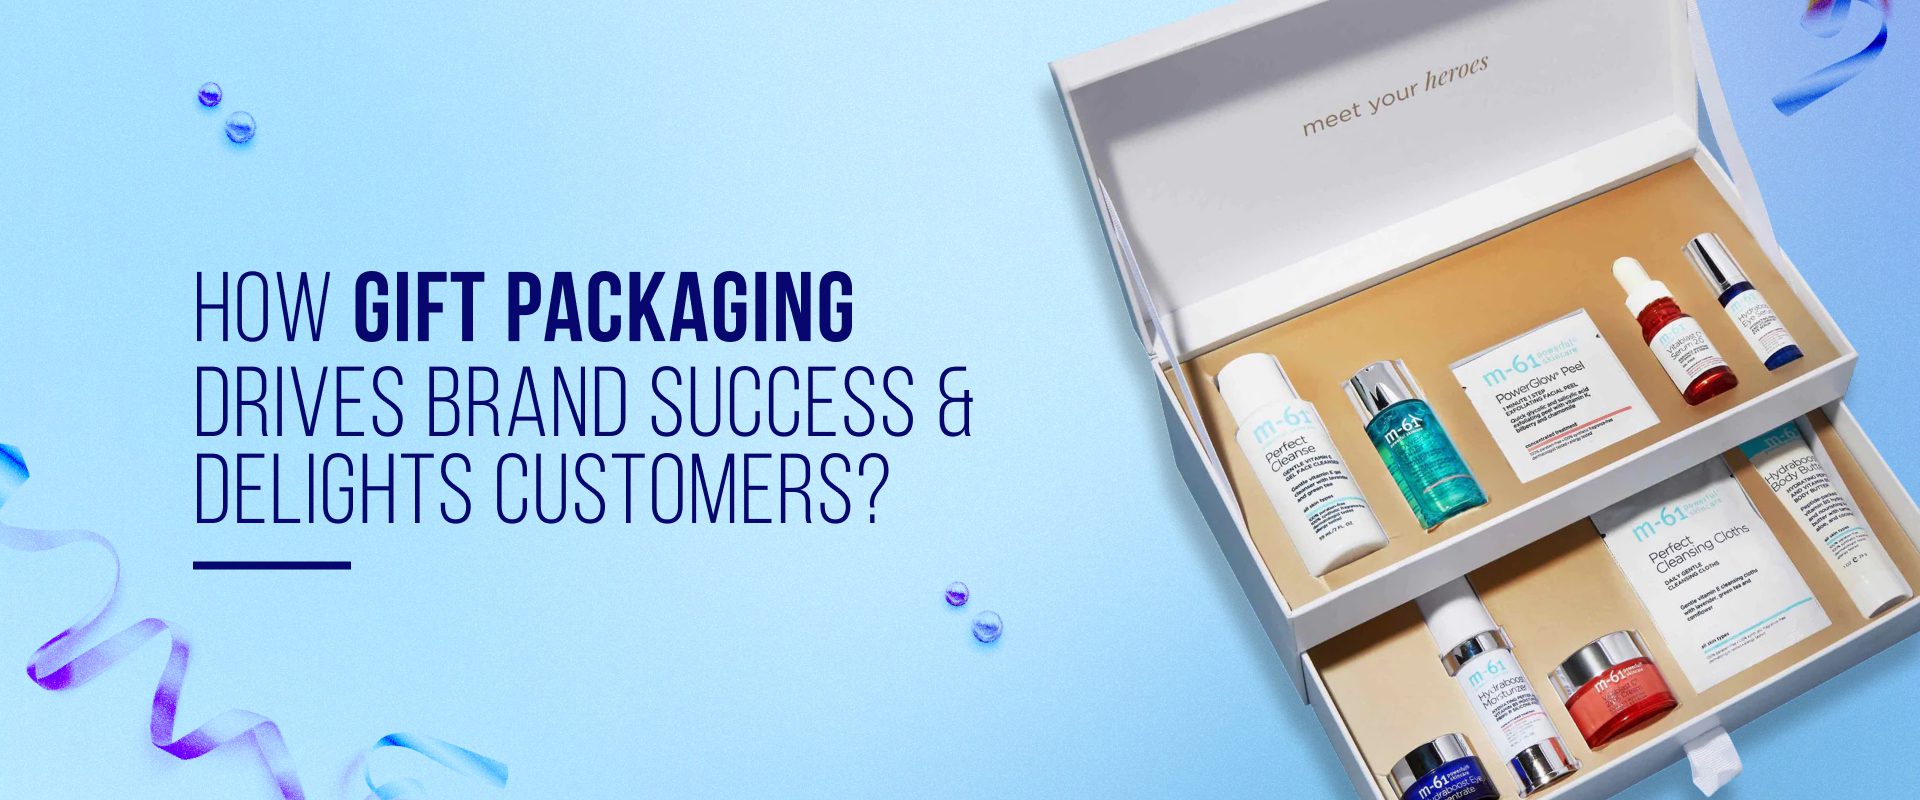 How Gift Packaging Drives Brand Success & Delights Customers